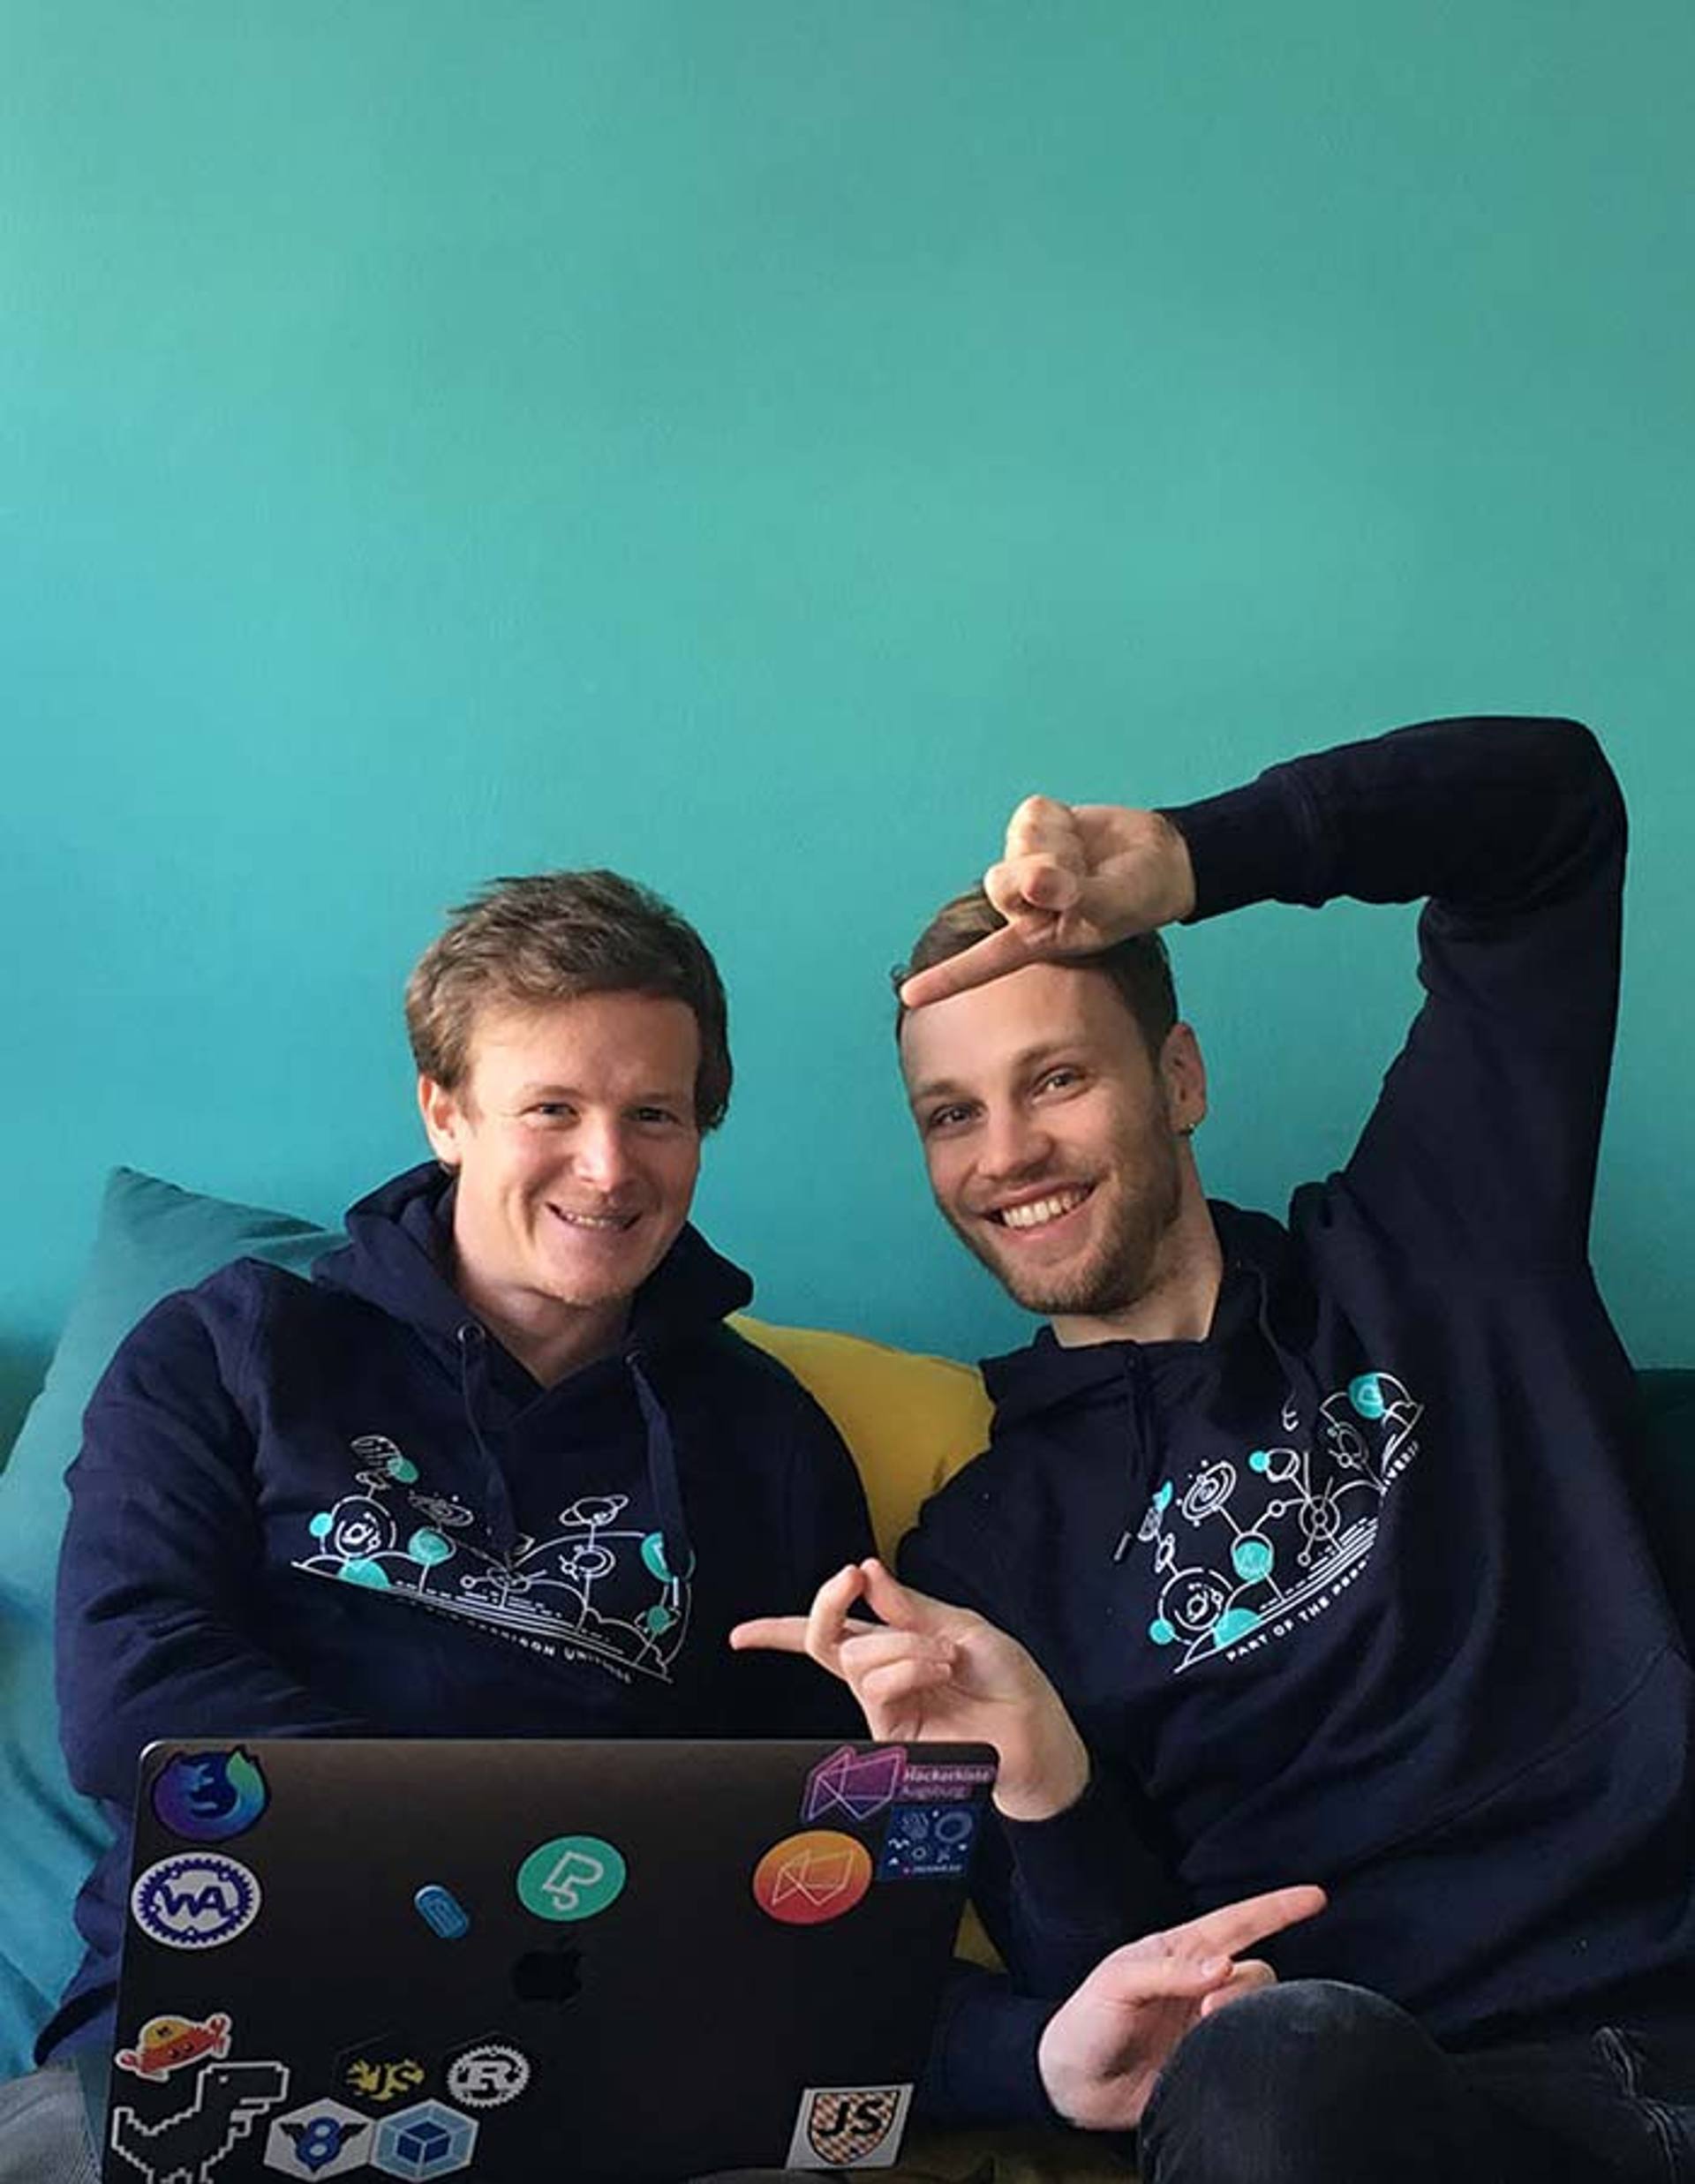 Two employees from the Peerigon software company with new pullovers